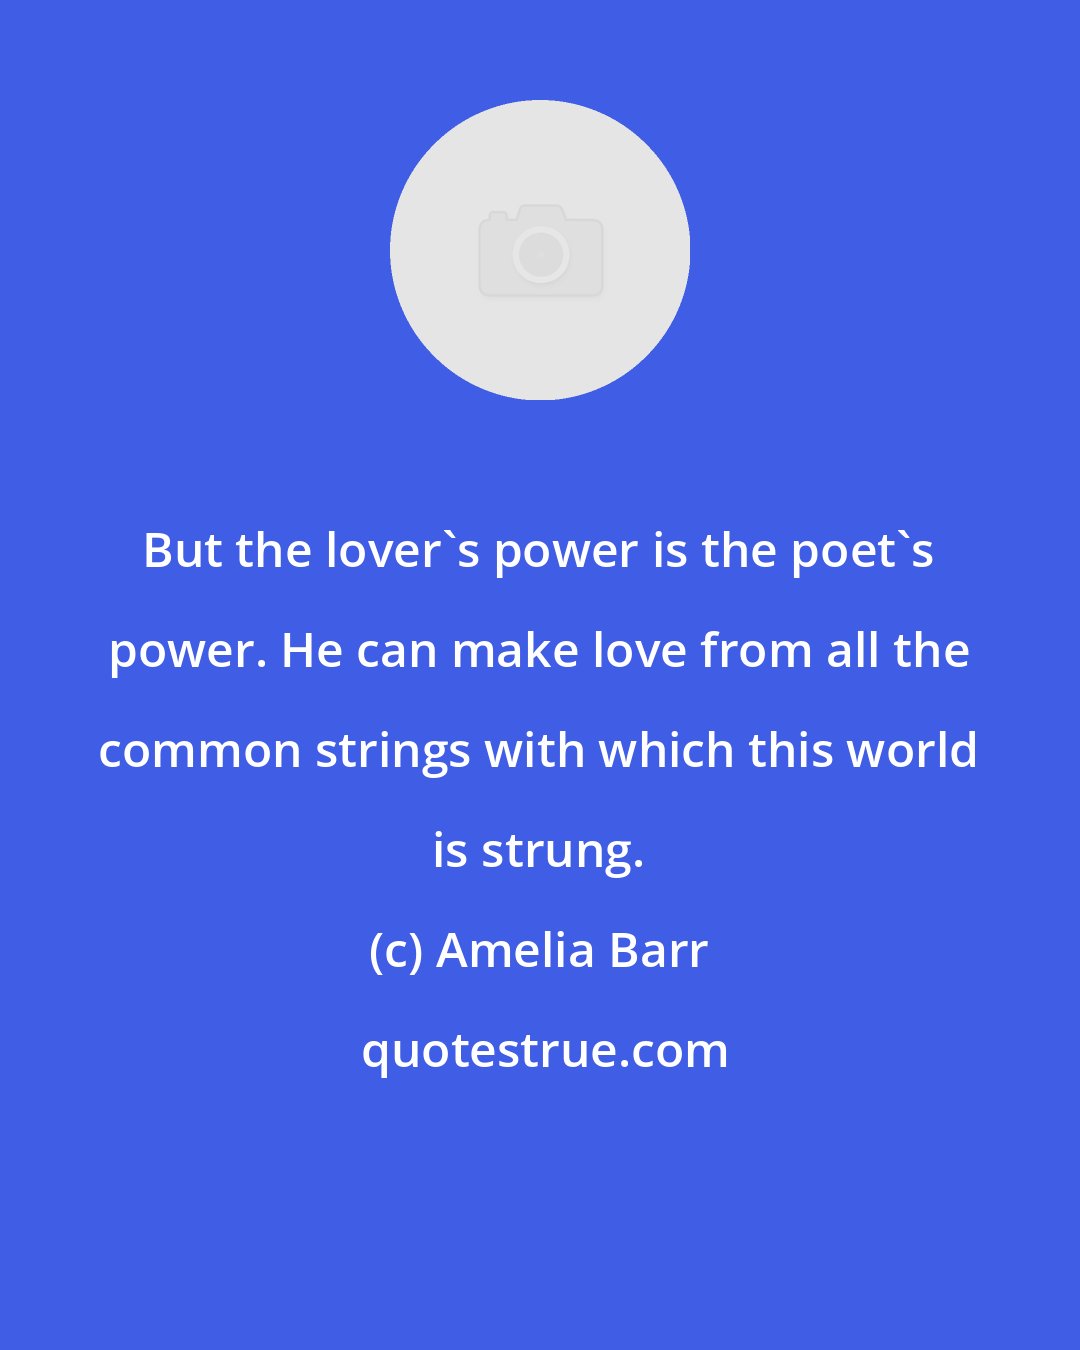 Amelia Barr: But the lover's power is the poet's power. He can make love from all the common strings with which this world is strung.